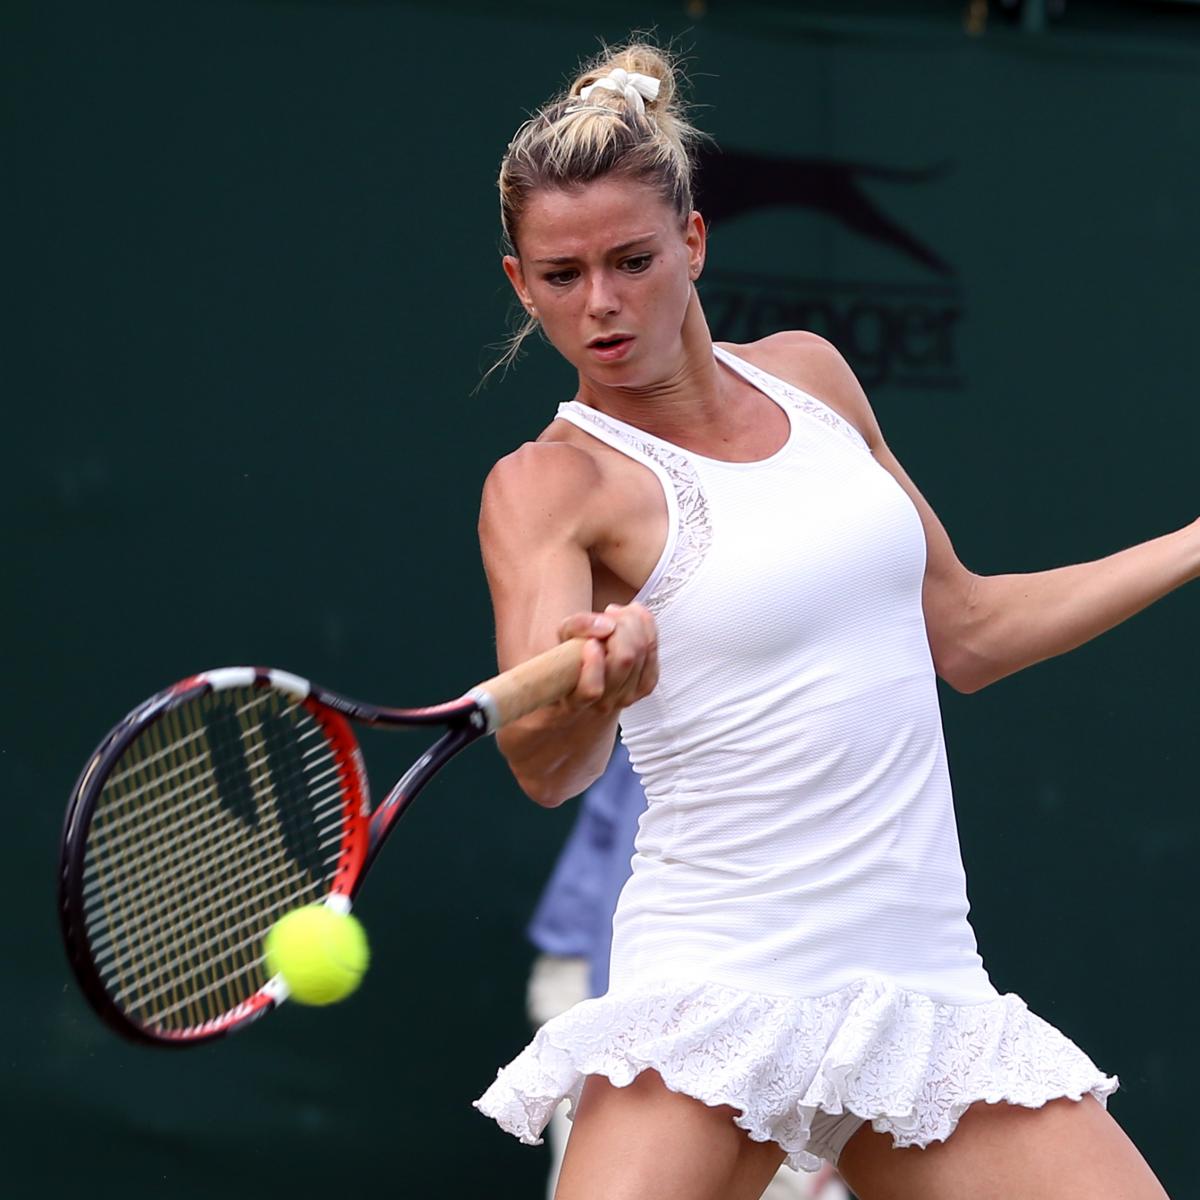 Wimbledon stars forced to play braless as rule come under